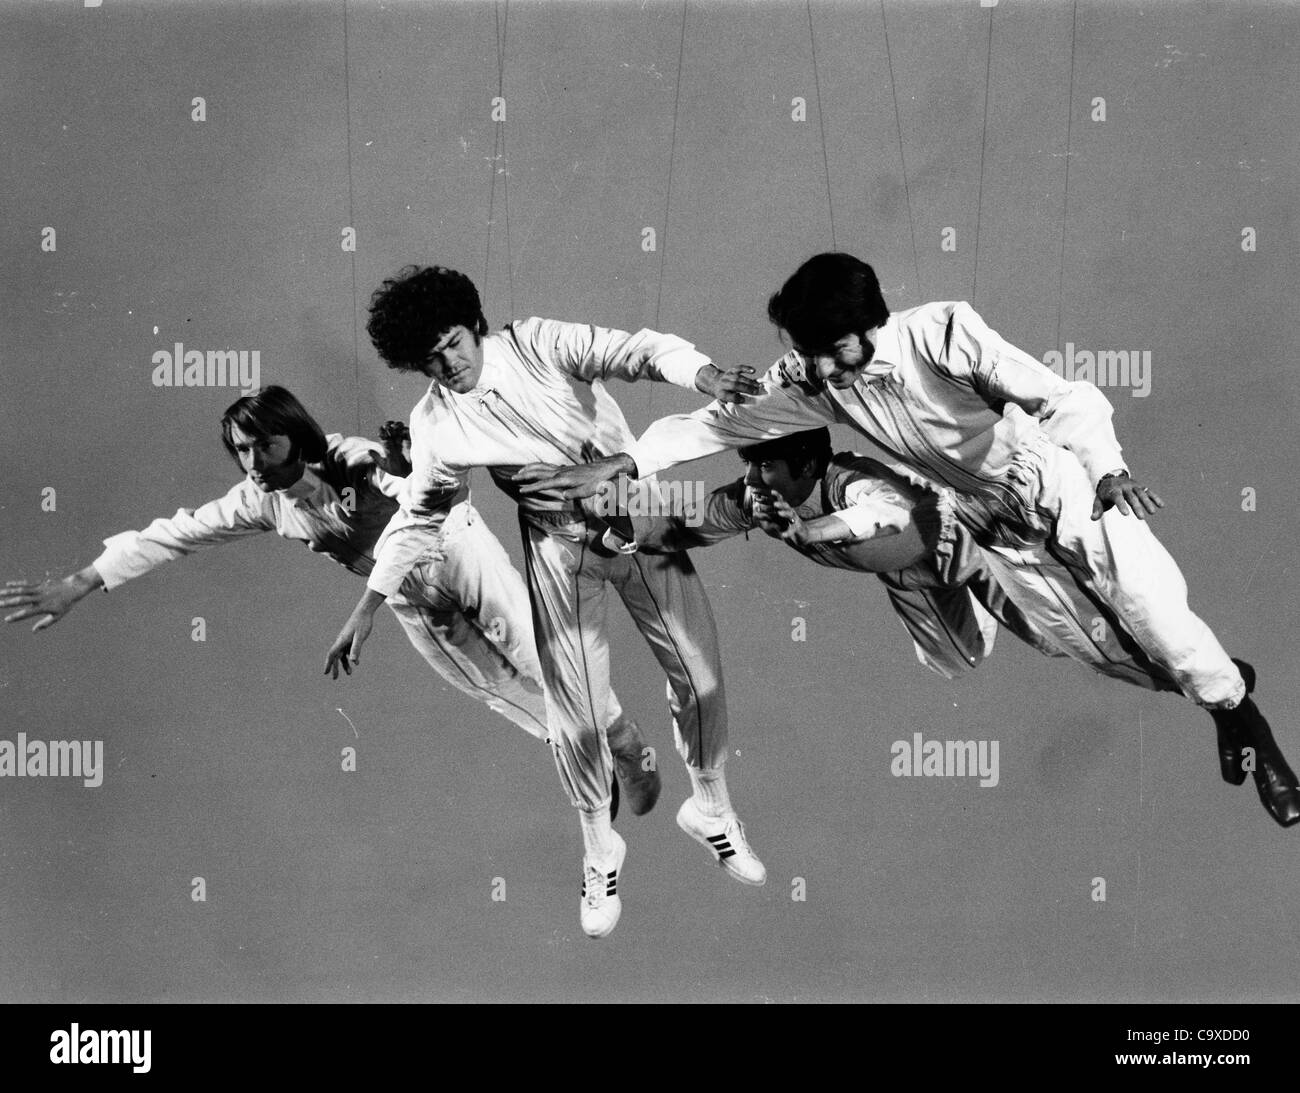 Feb 07, 1958; London, UK; Monkees, PETER TORK, MICKY DOLENZ, DAVY JONES, and MIKE NESMITH swinging for their new film. (Credit Image: © KEYSTONE Pictures USA/ZUMAPRESS.com) Stock Photo